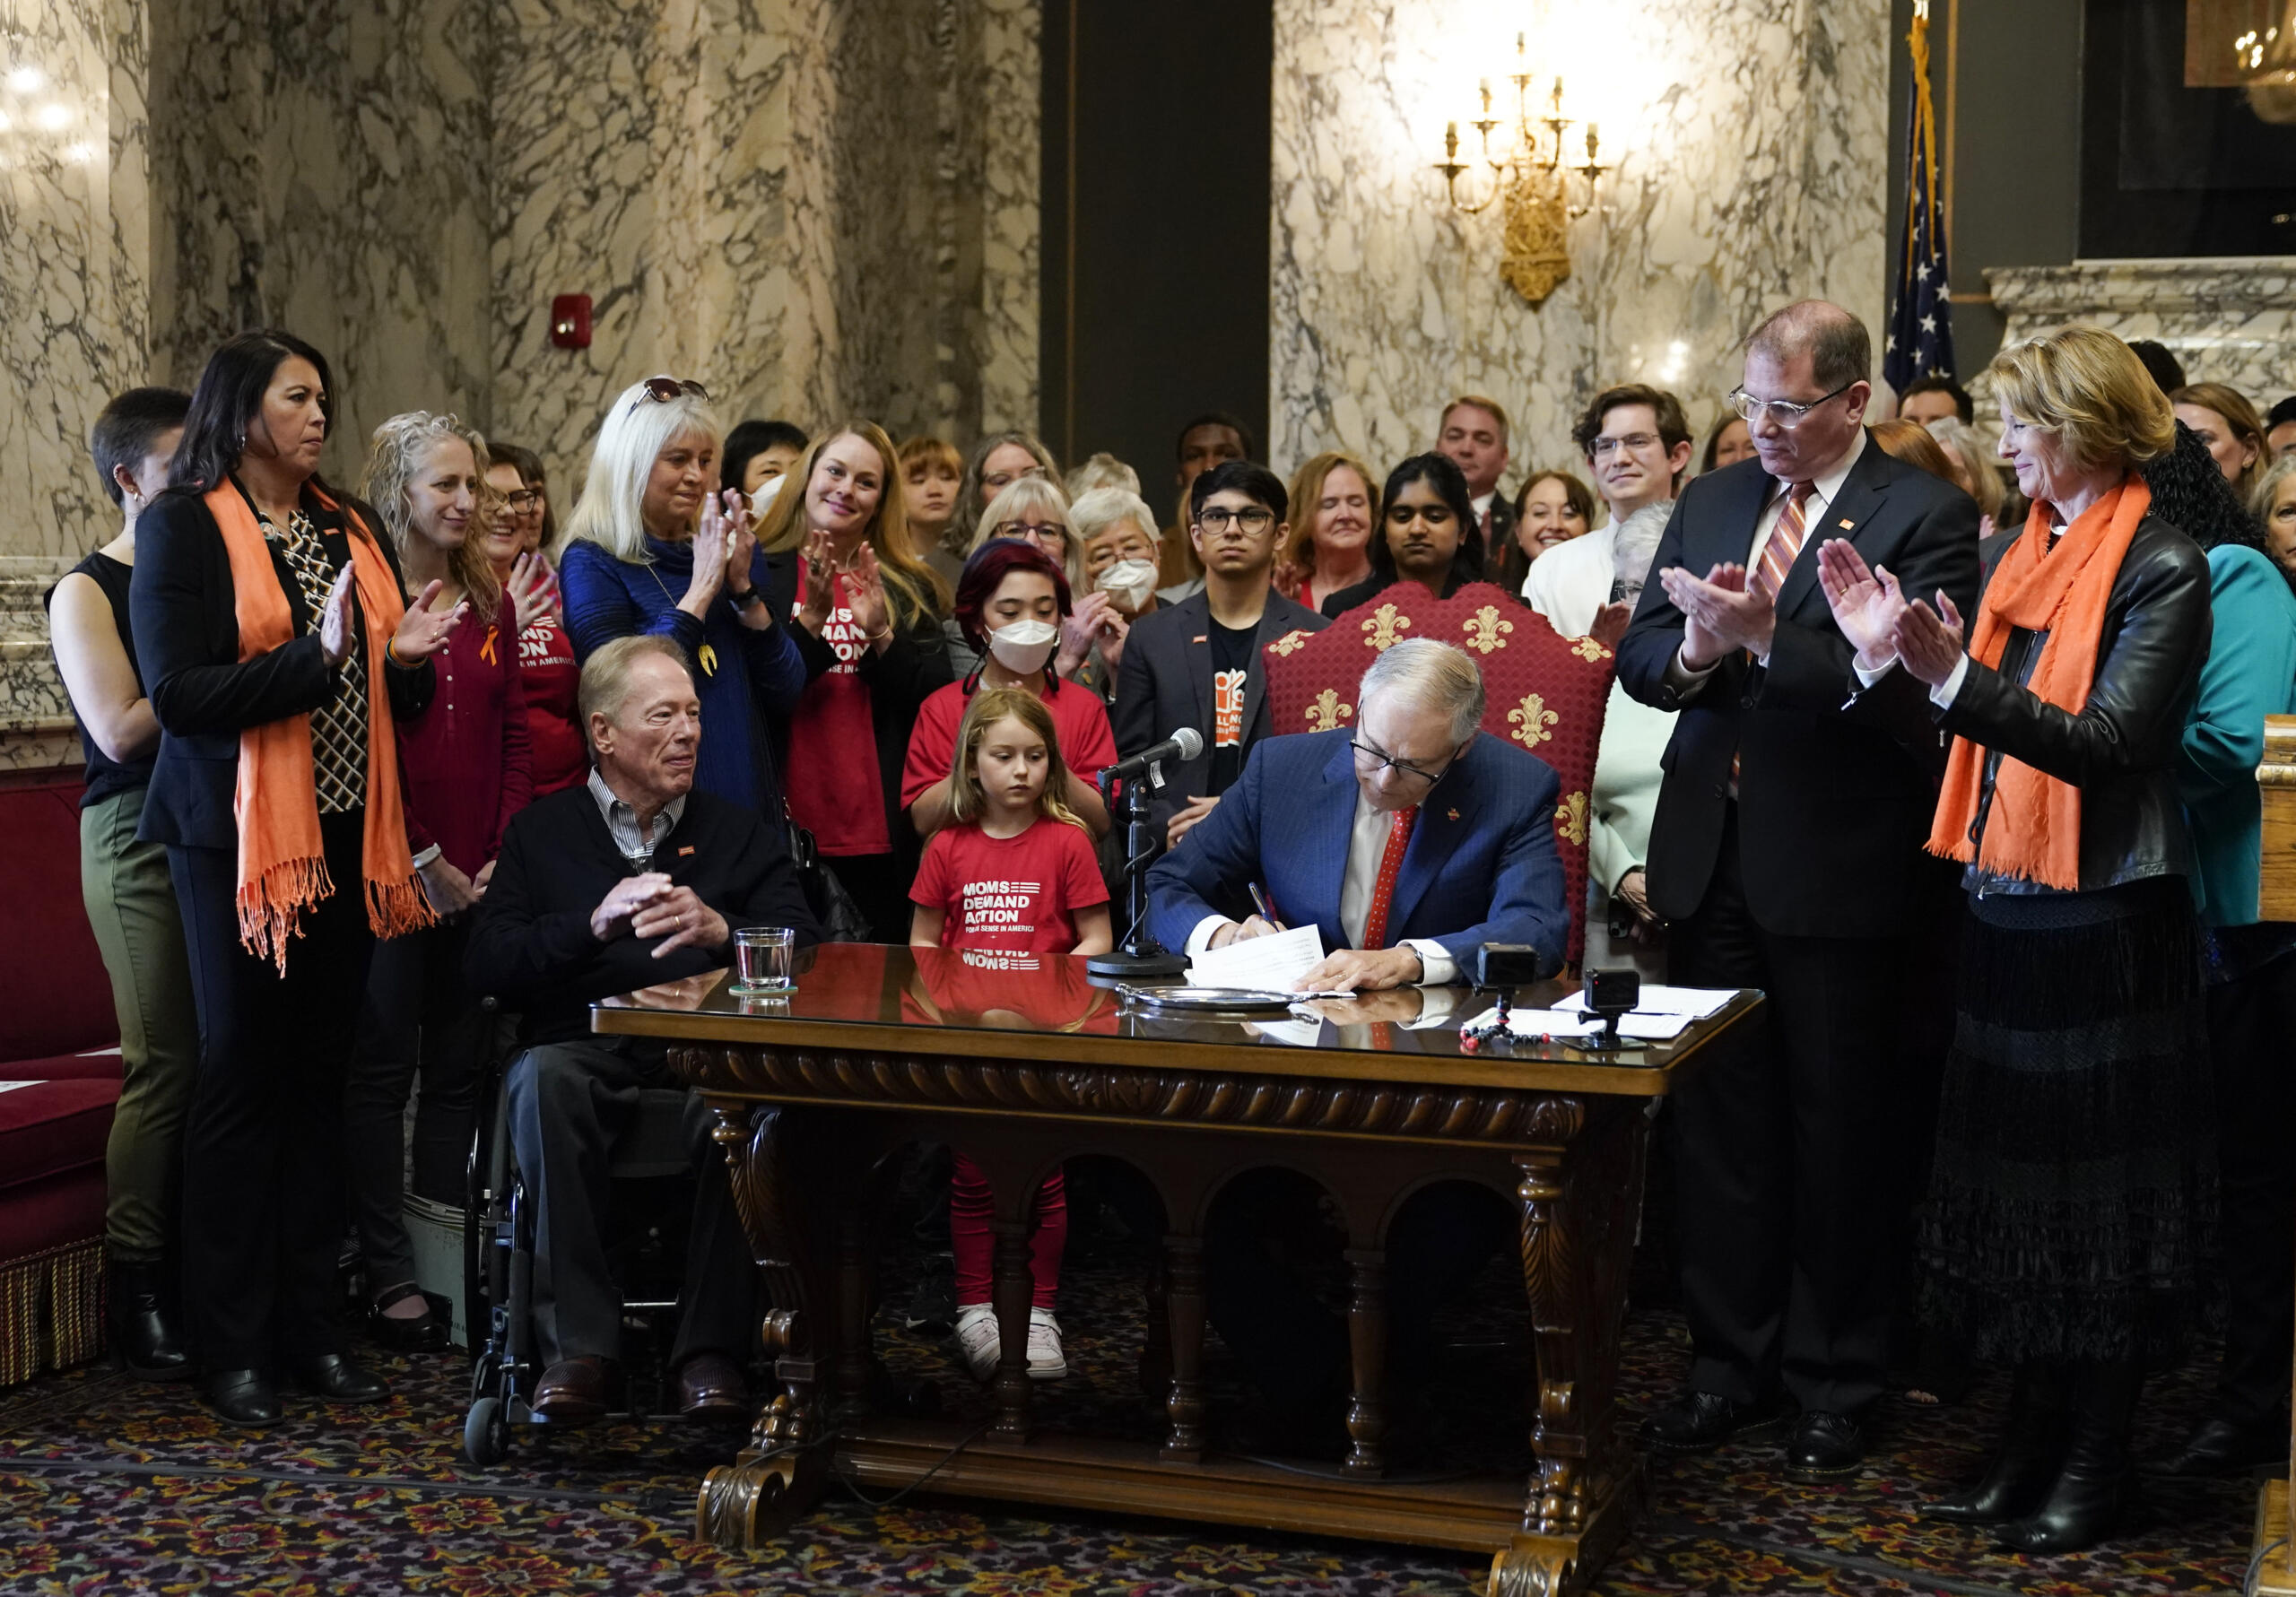 FILE - Washington Gov. Jay Inslee signs House Bill 1240, which prohibits the manufacture, importation, distribution and sale of semi-automatic assault-style weapons in the state, April 25, 2023, at the state Capitol in Olympia, Wash. A U.S. judge on Tuesday, June 6, rejected a request to block a new Washington state law banning the sale of certain semi-automatic rifles, one of three measures recently signed by Inslee in an effort to reduce gun violence.